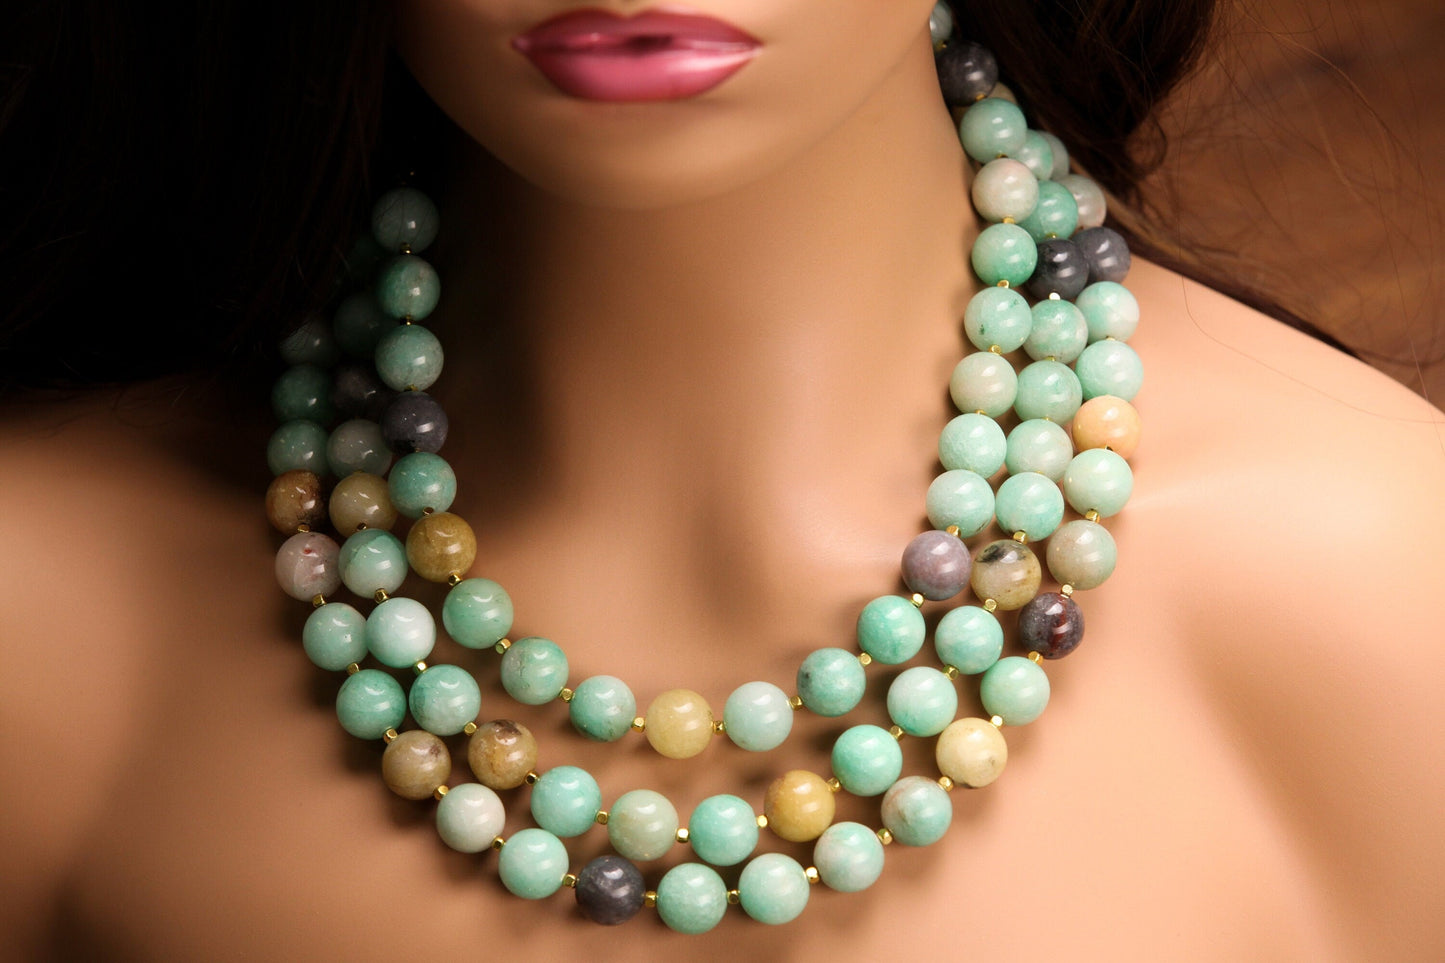 Natural Multi Amazonite AAA Quality Large Smooth Round 14mm Gemstone Bead 3 Layer Chunky Necklace, Beautiful Gift For Her